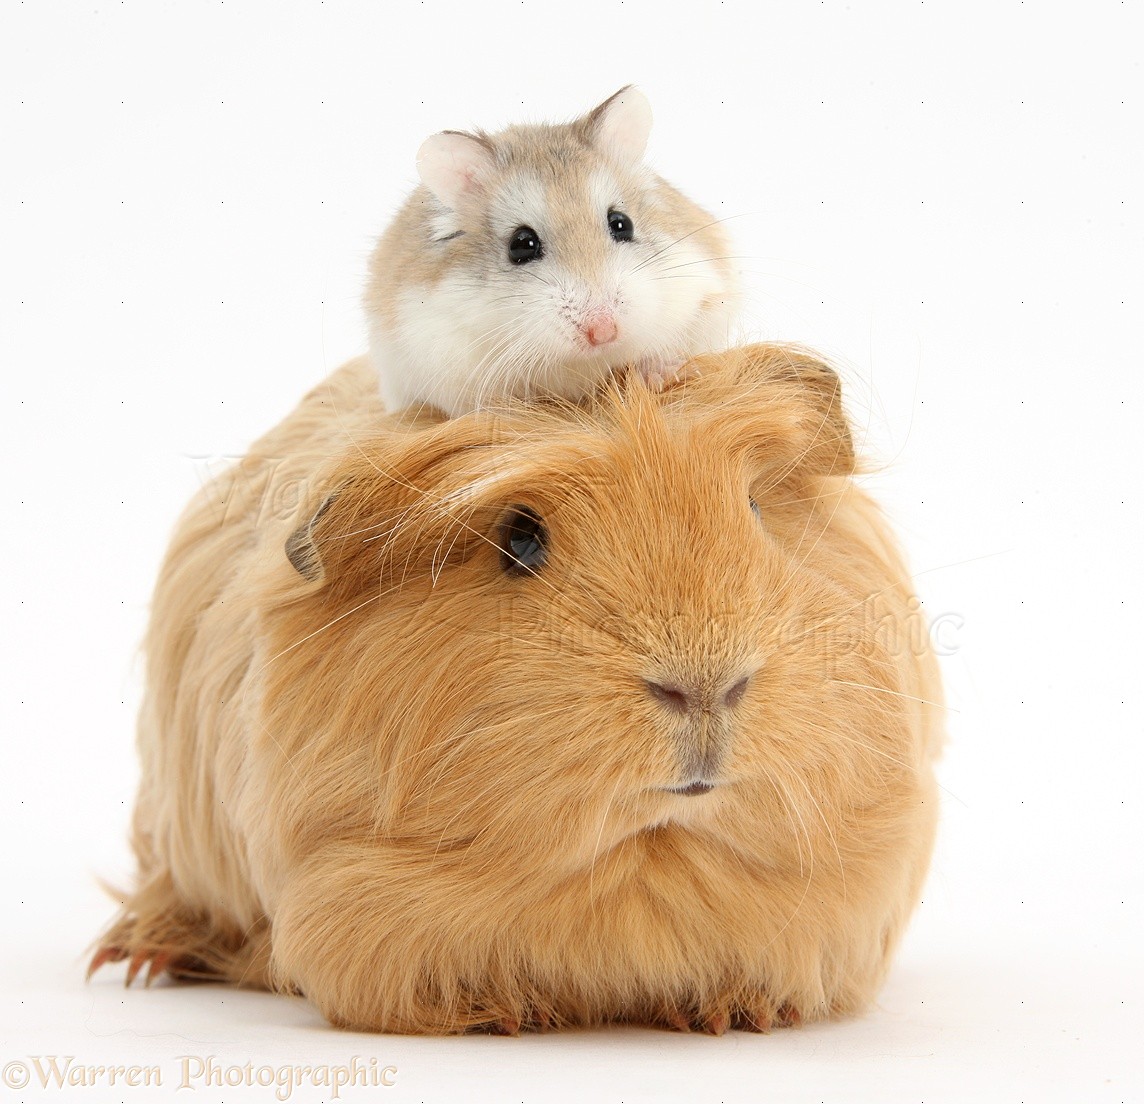      http://www.warrenphotographic.co.uk/photography/bigs/39652-Ginger-Guinea-pig-and-Roborovski-Hamster-white-background.jpg                                                     